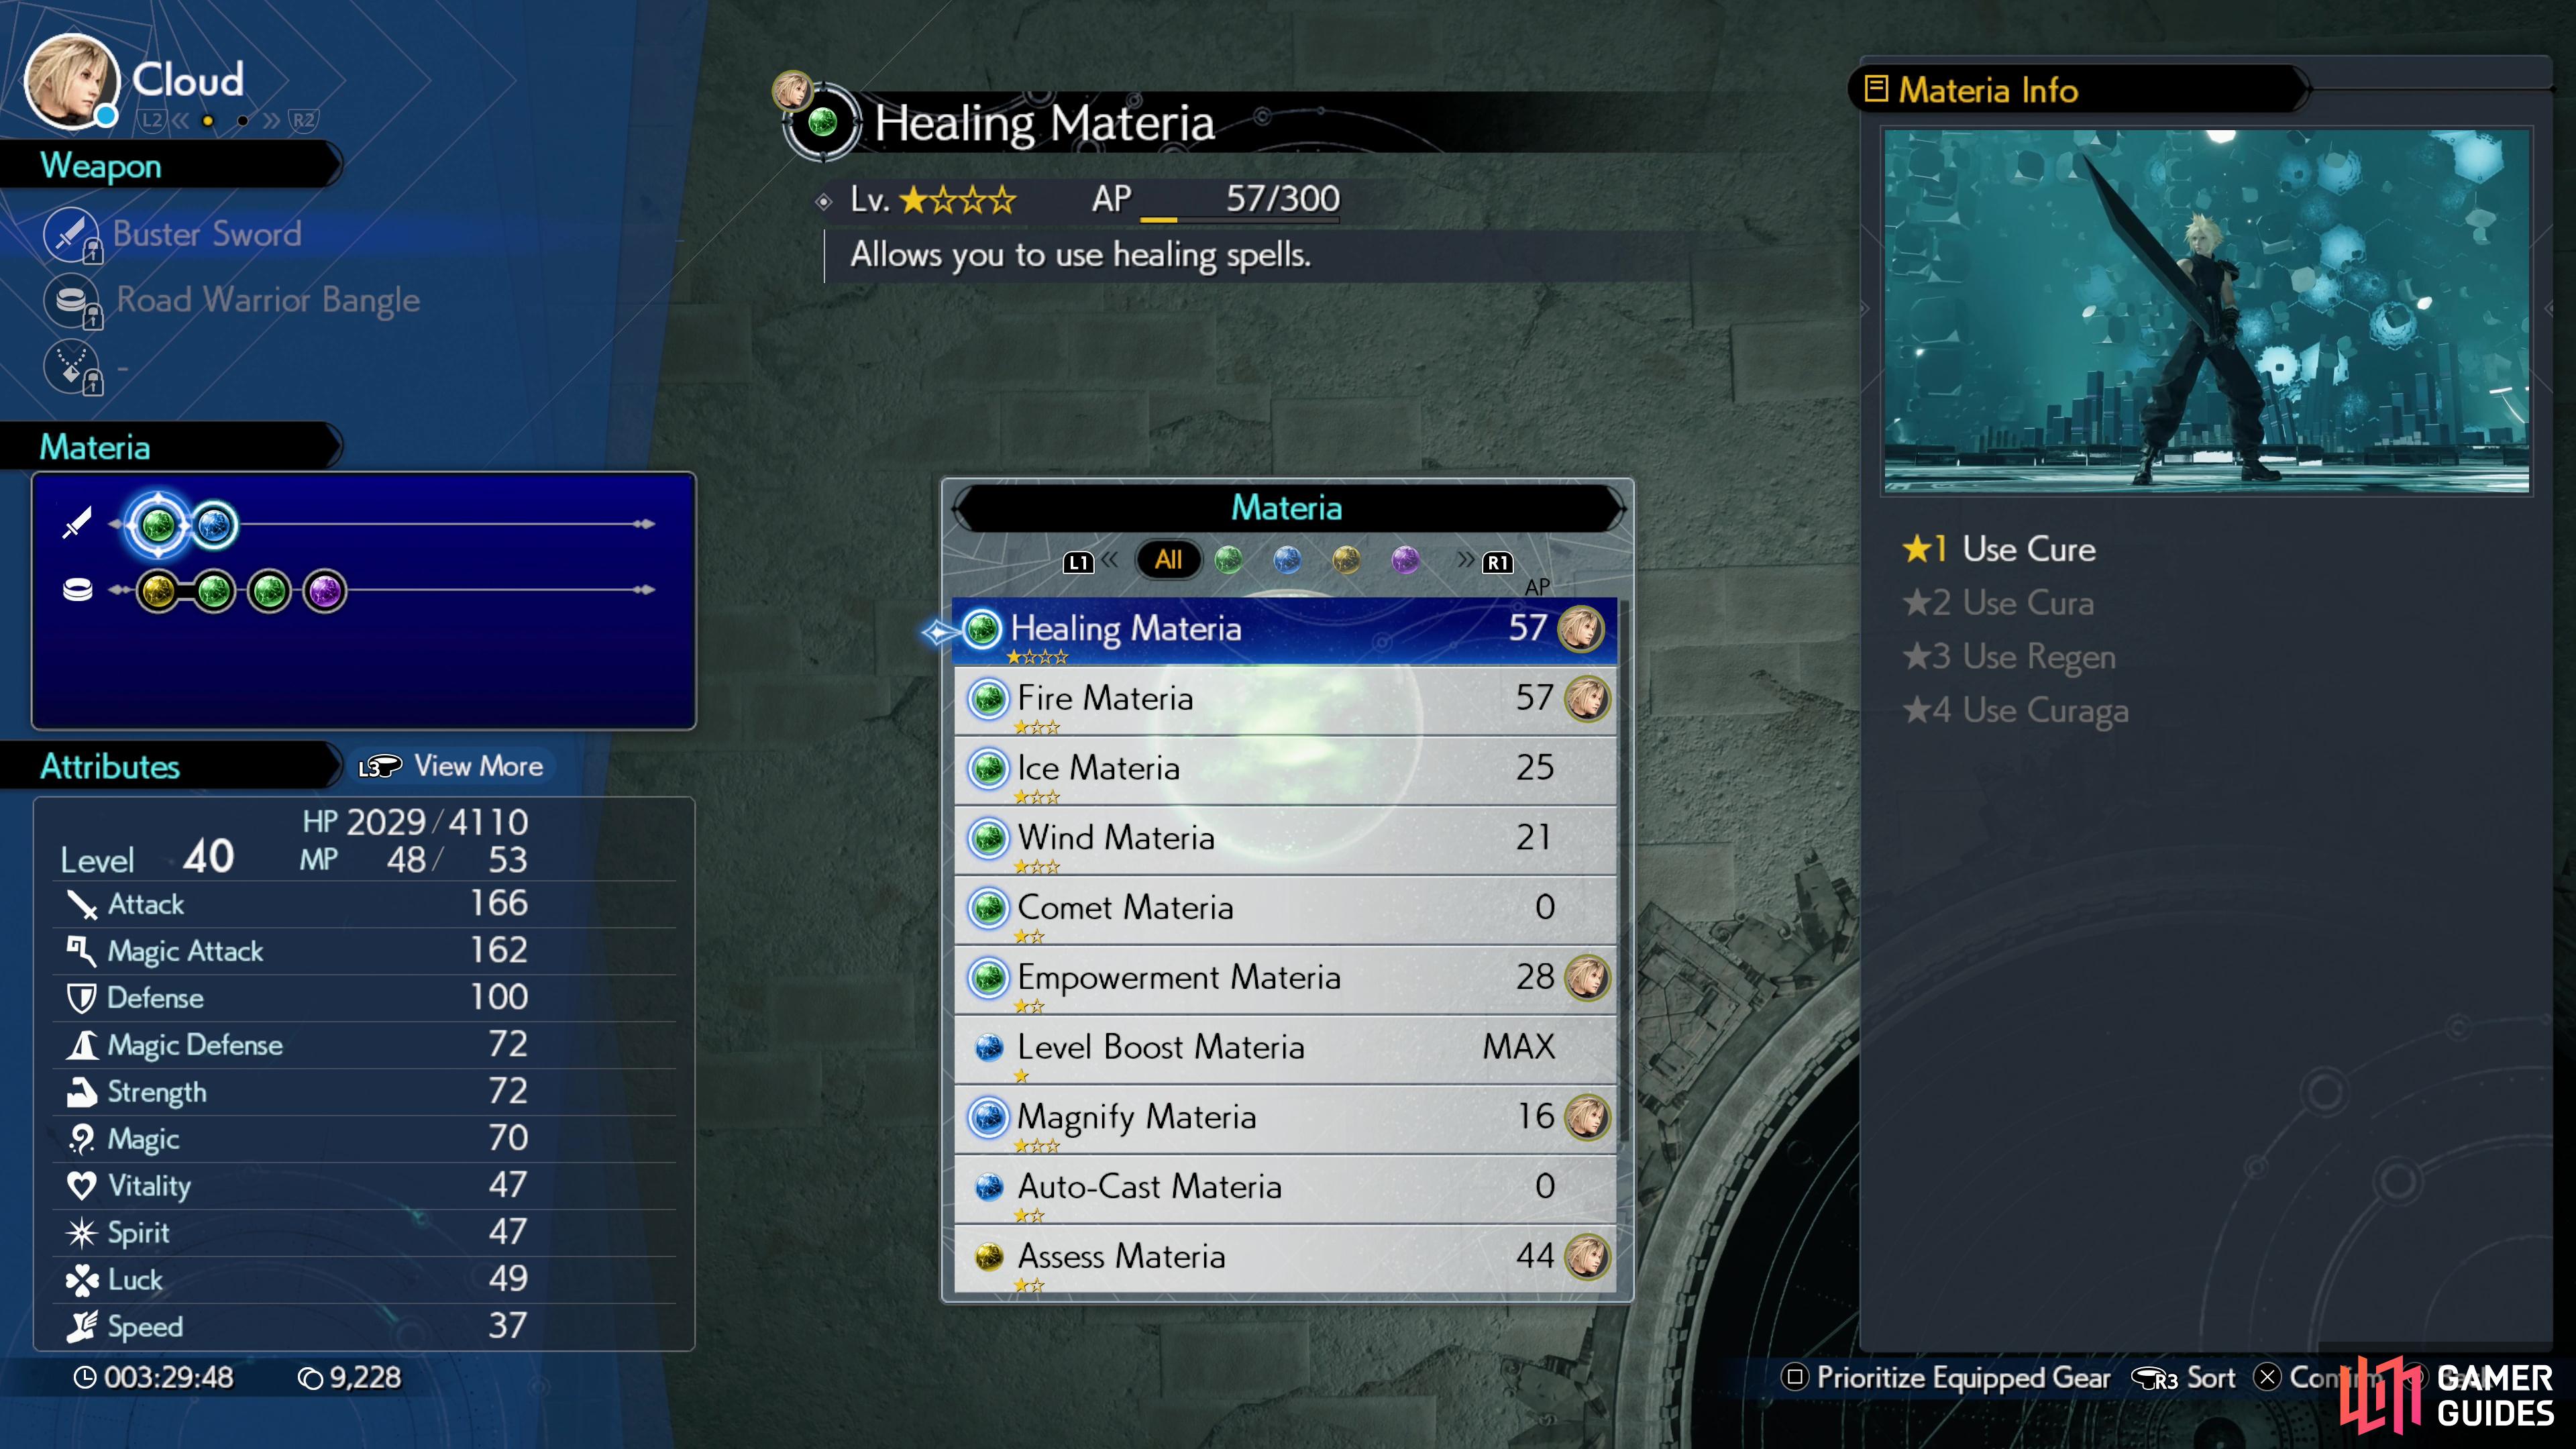 When you select a materia socket (empty or otherwise) you’ll bring up a list of owned materia you can install in that materia socket. Equipped materia can be used in battle and earn AP.